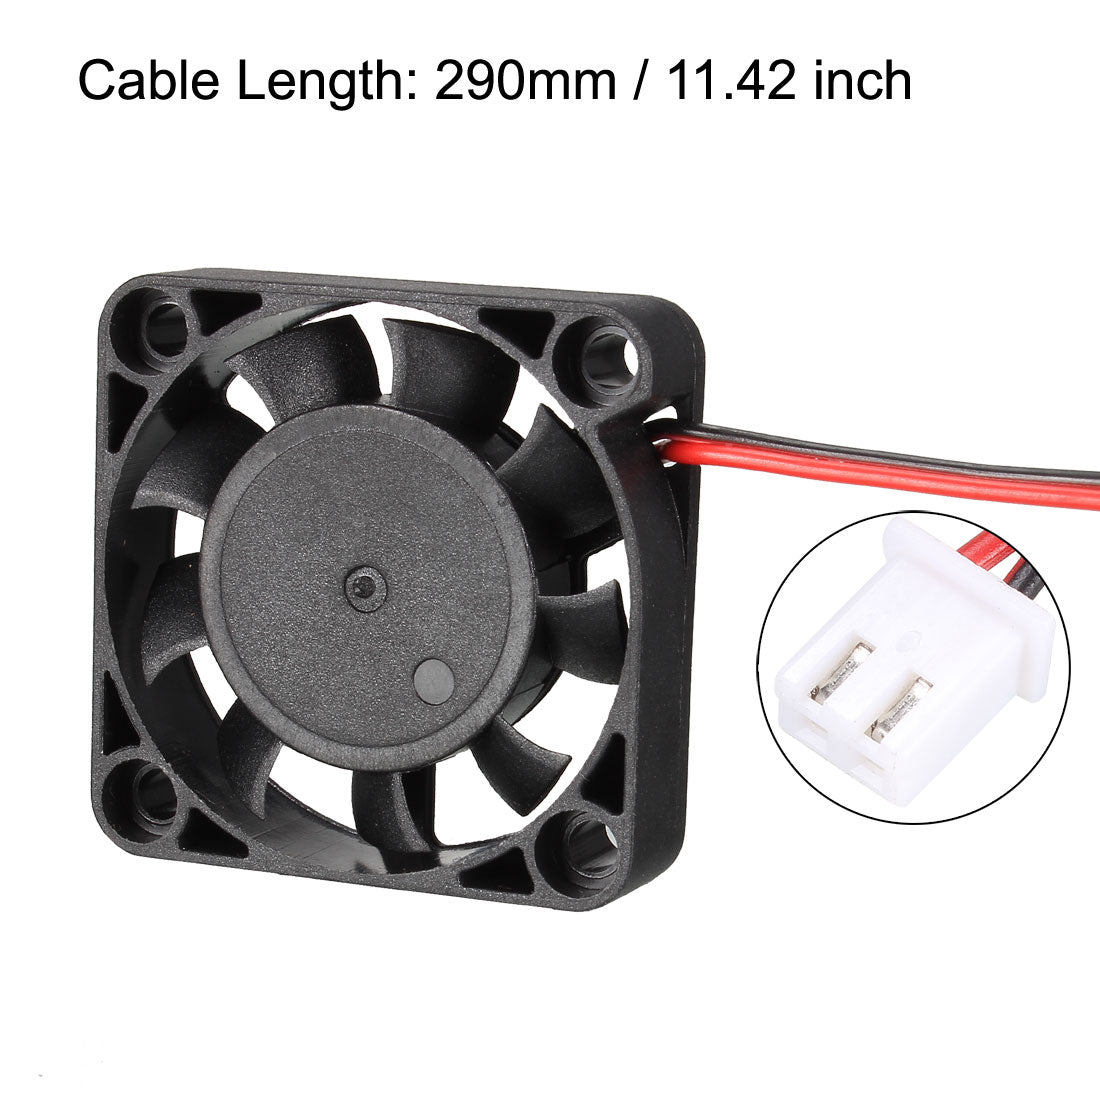 uxcell Uxcell 40mmx40mmx10mm Cooling Fan DC 24V for 3D Printer Extruder